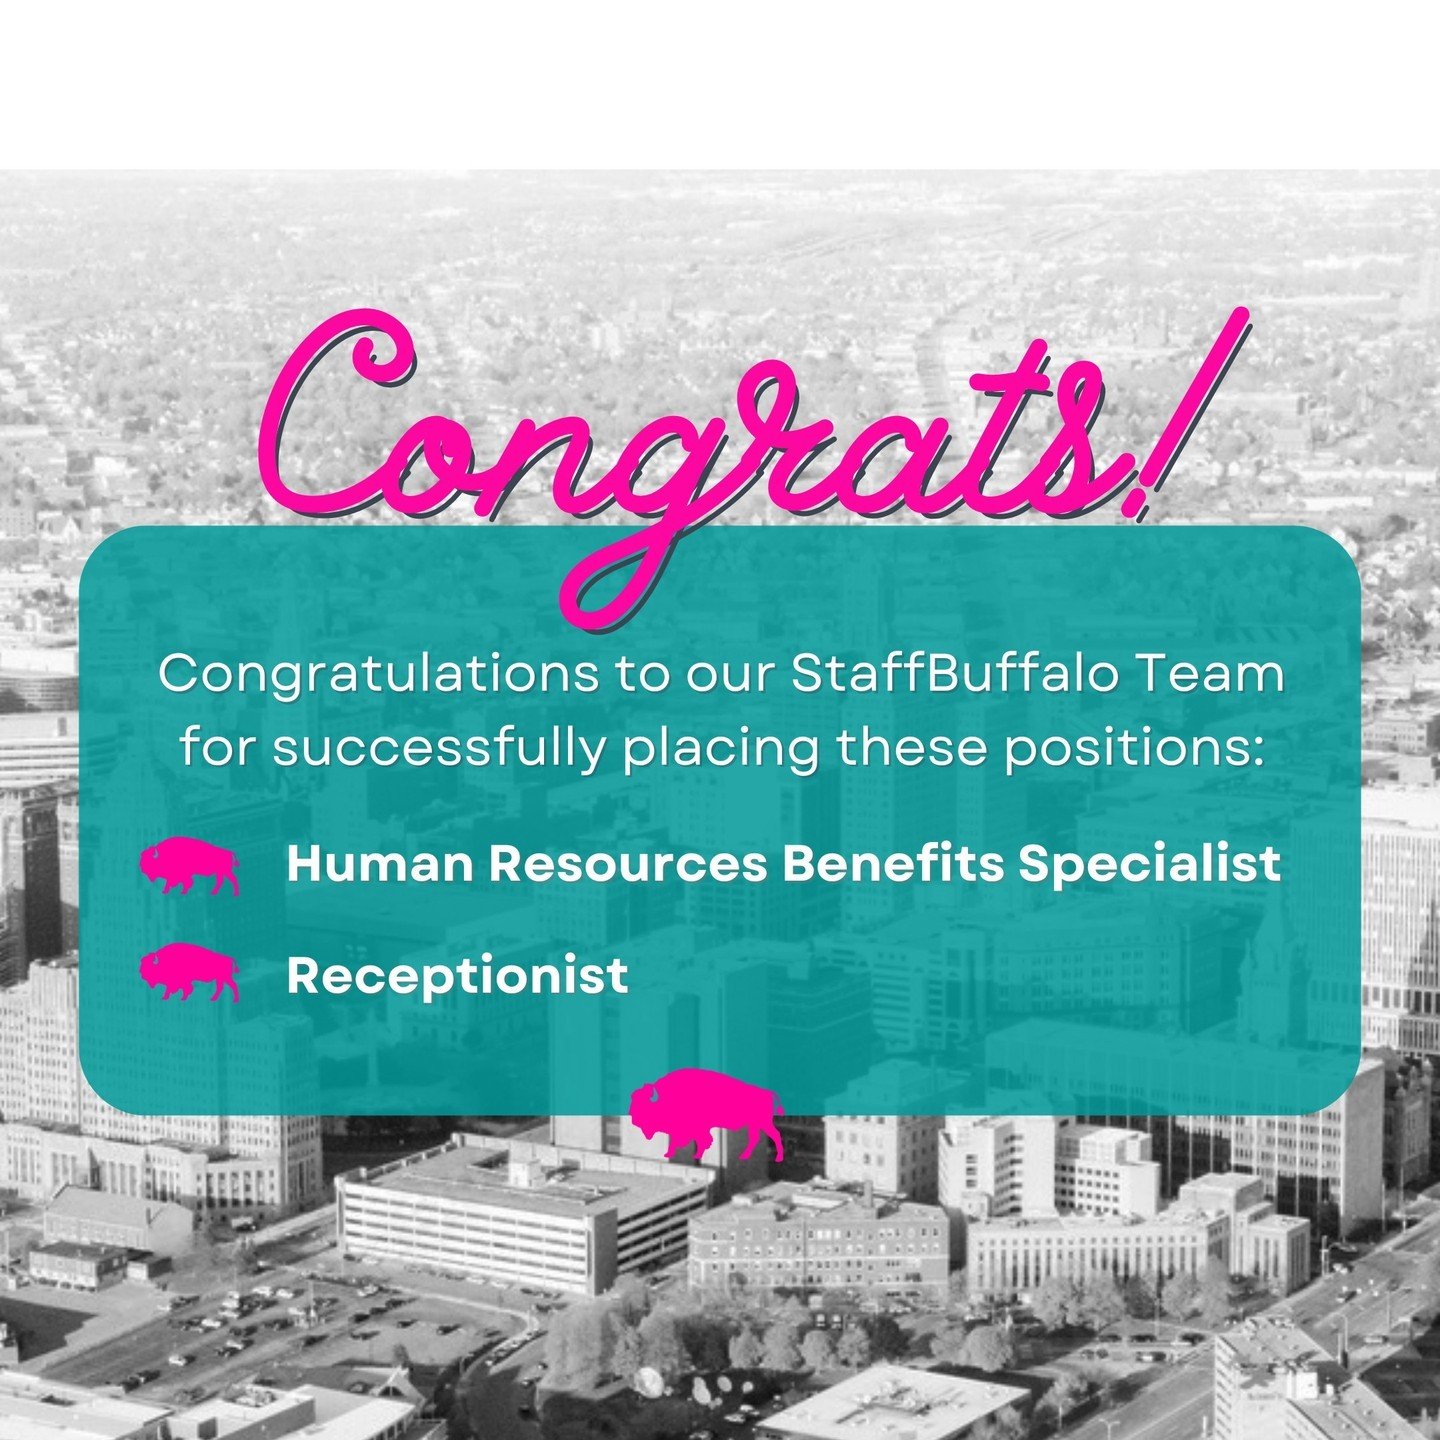 We want to congratulate our @staffbuffalo Recruiting team for their success in filling these positions recently! It is the start to a new beginning for the talented new hires, and we can't wait to see how their careers continue to flourish! We wish y